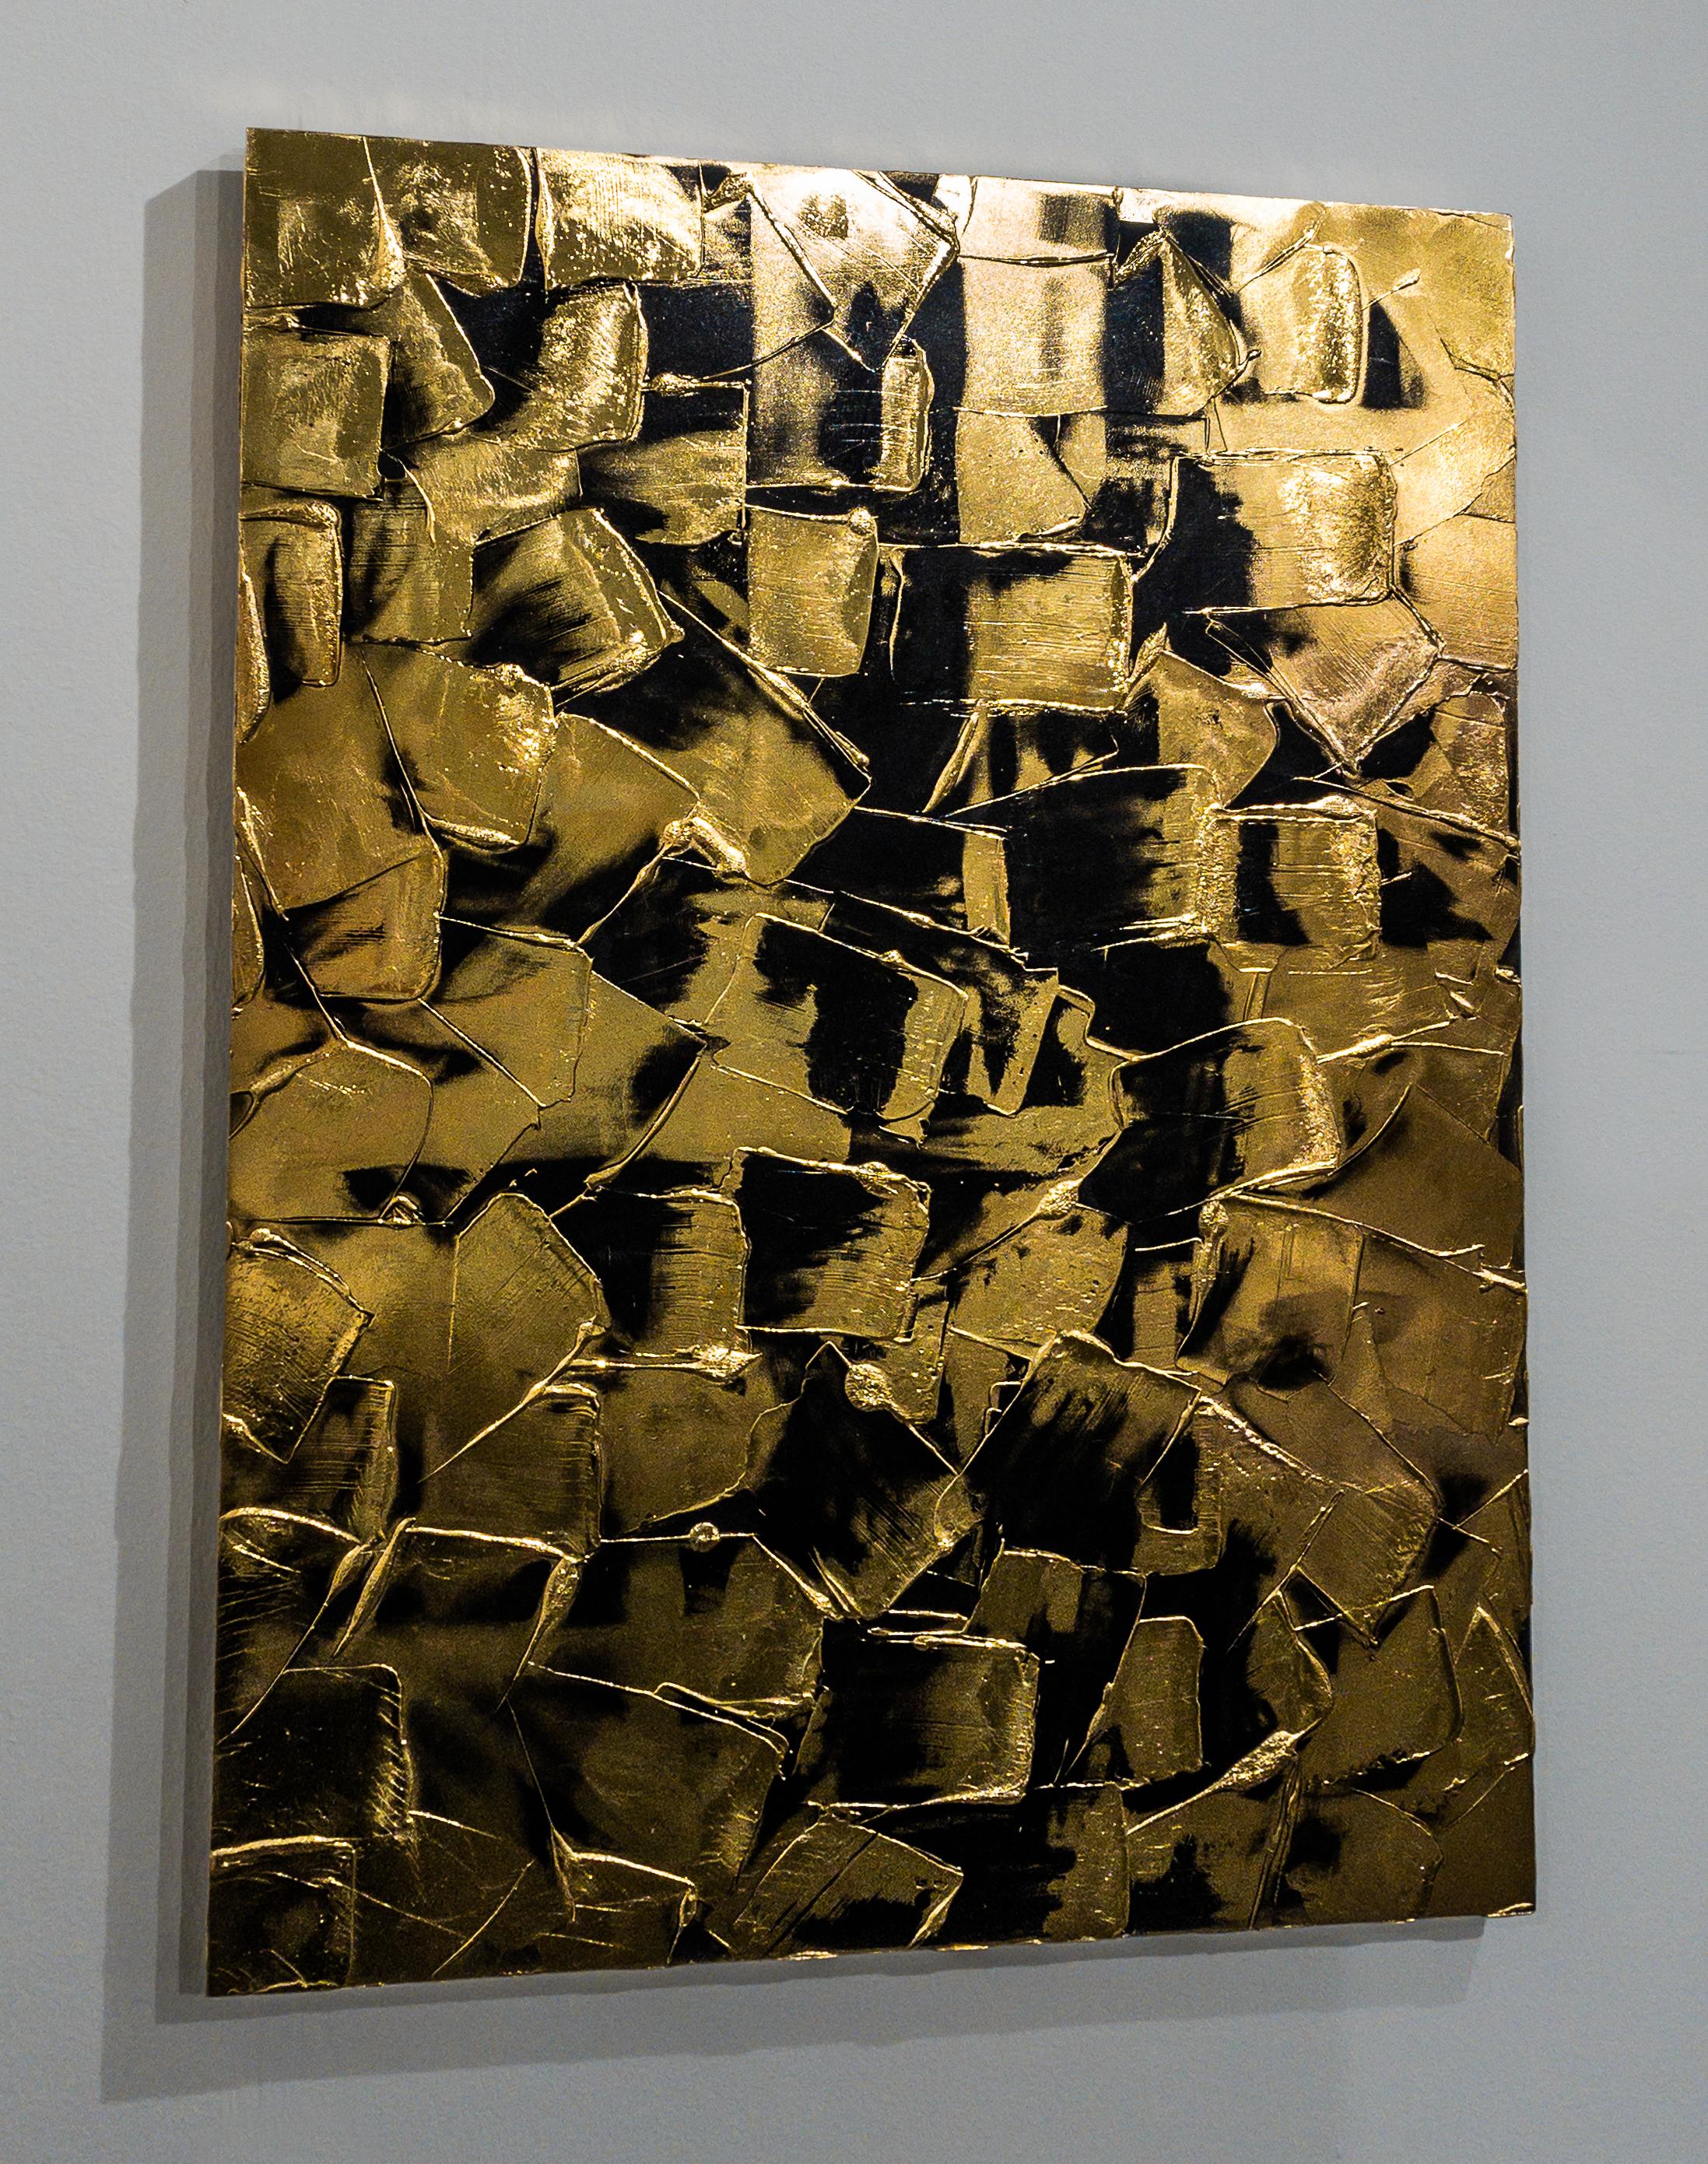 M. Clark Abstract Painting - "Under Pressure" - gold abstract painting 